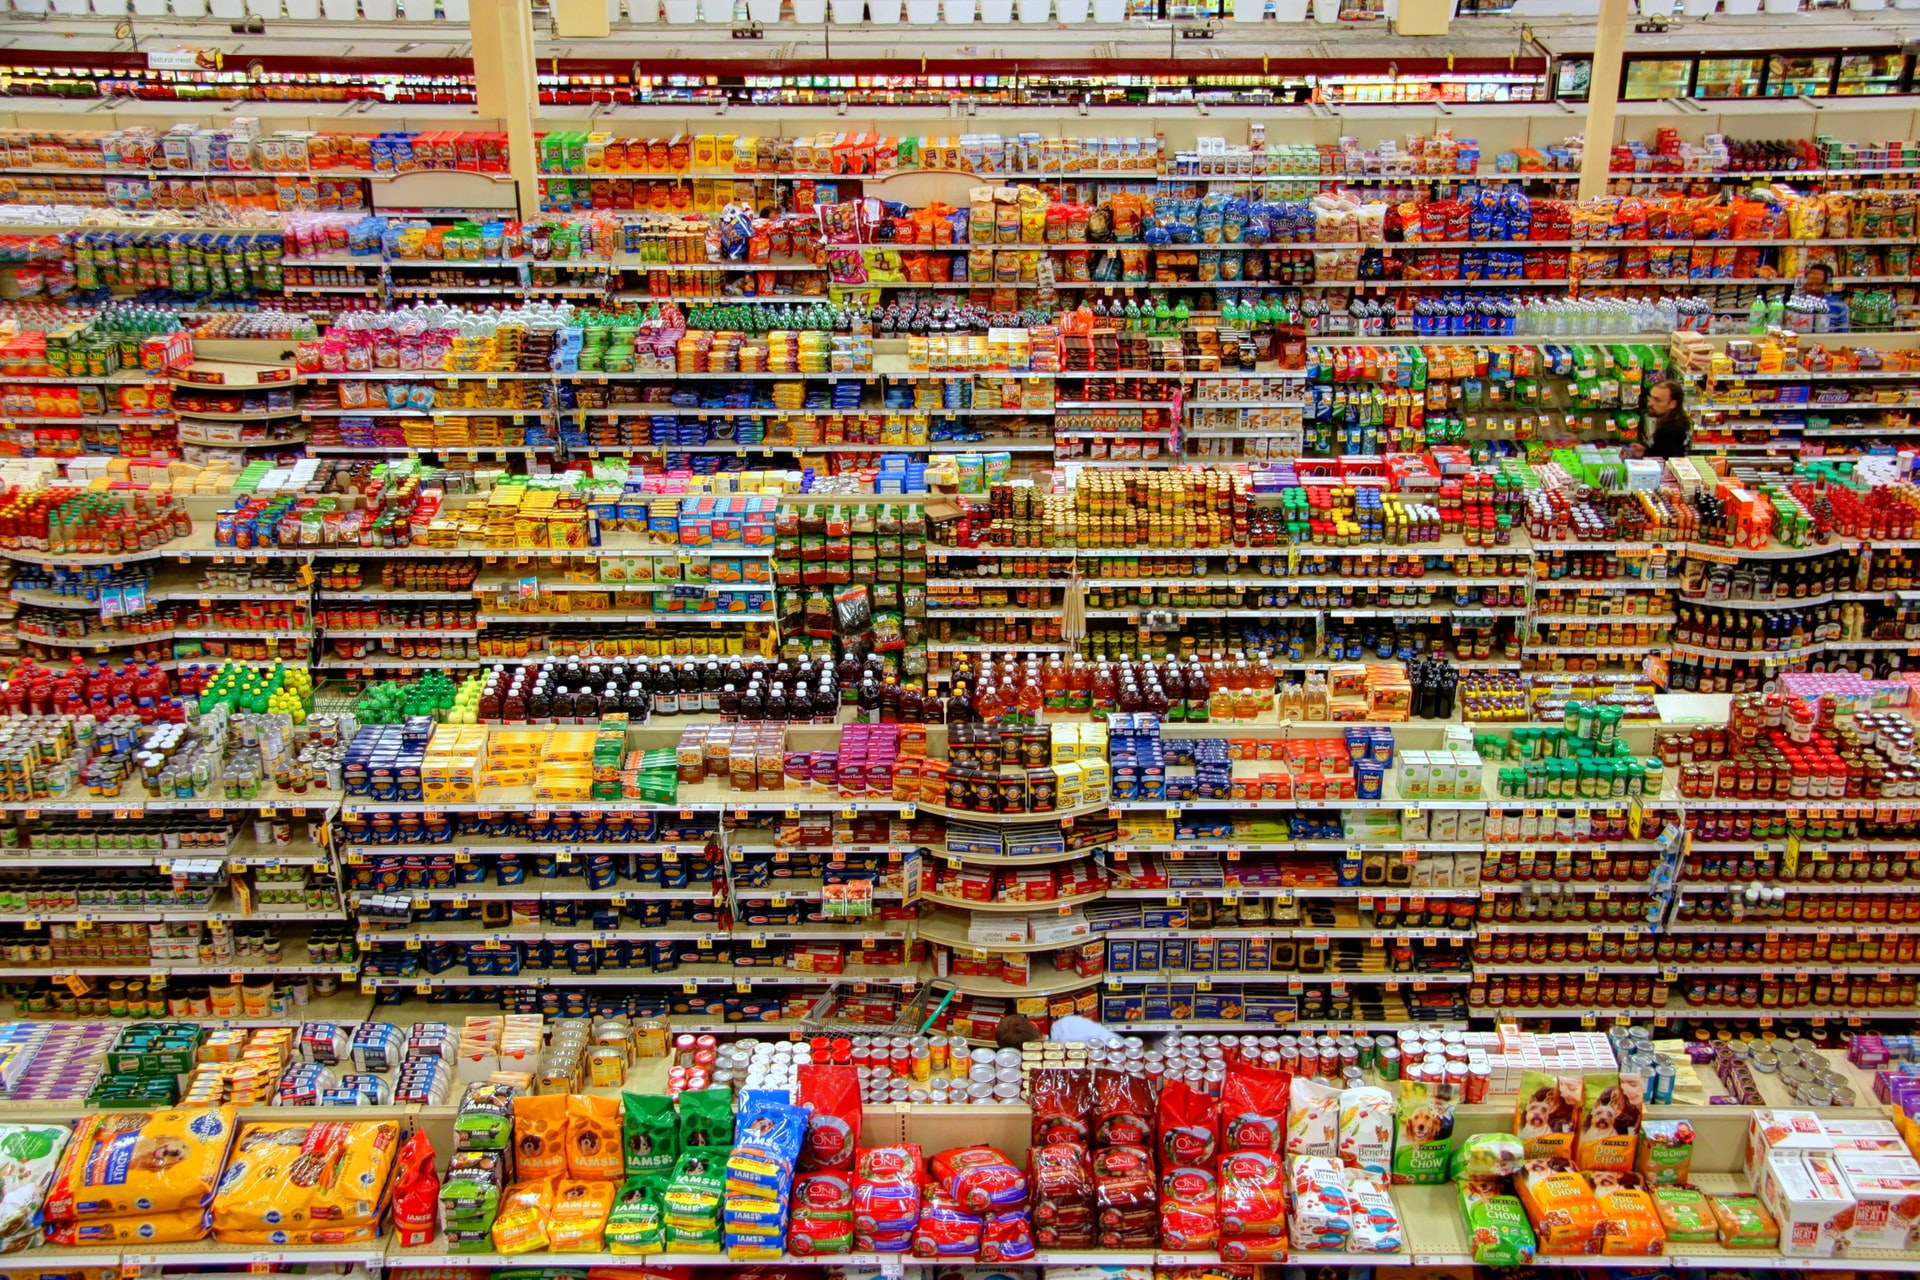 The shelves in a supermarket symbolize the retail spending.